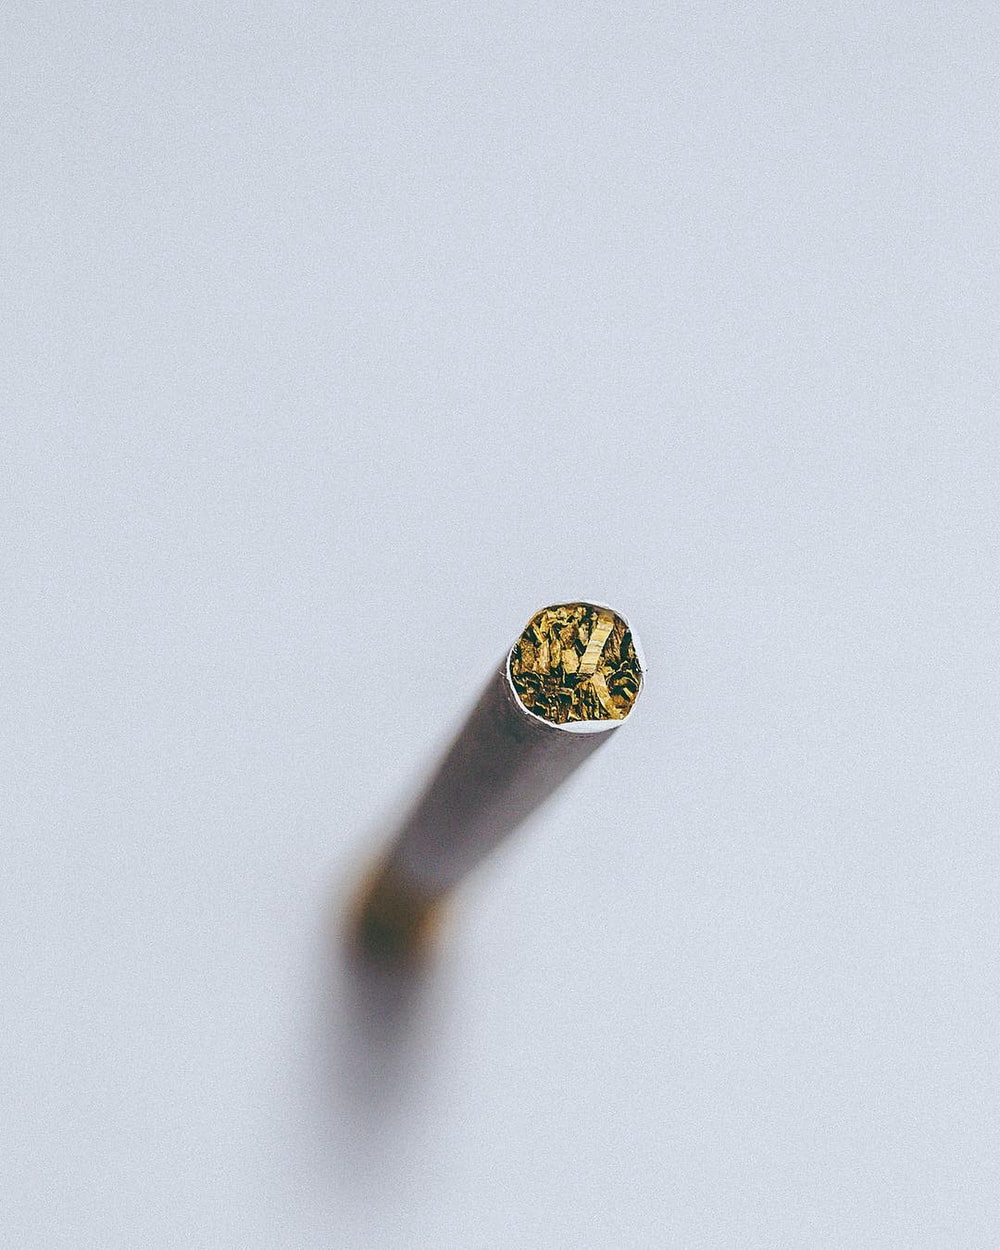 Nicotine Pictures Download Images on Unsplash 1000x1250